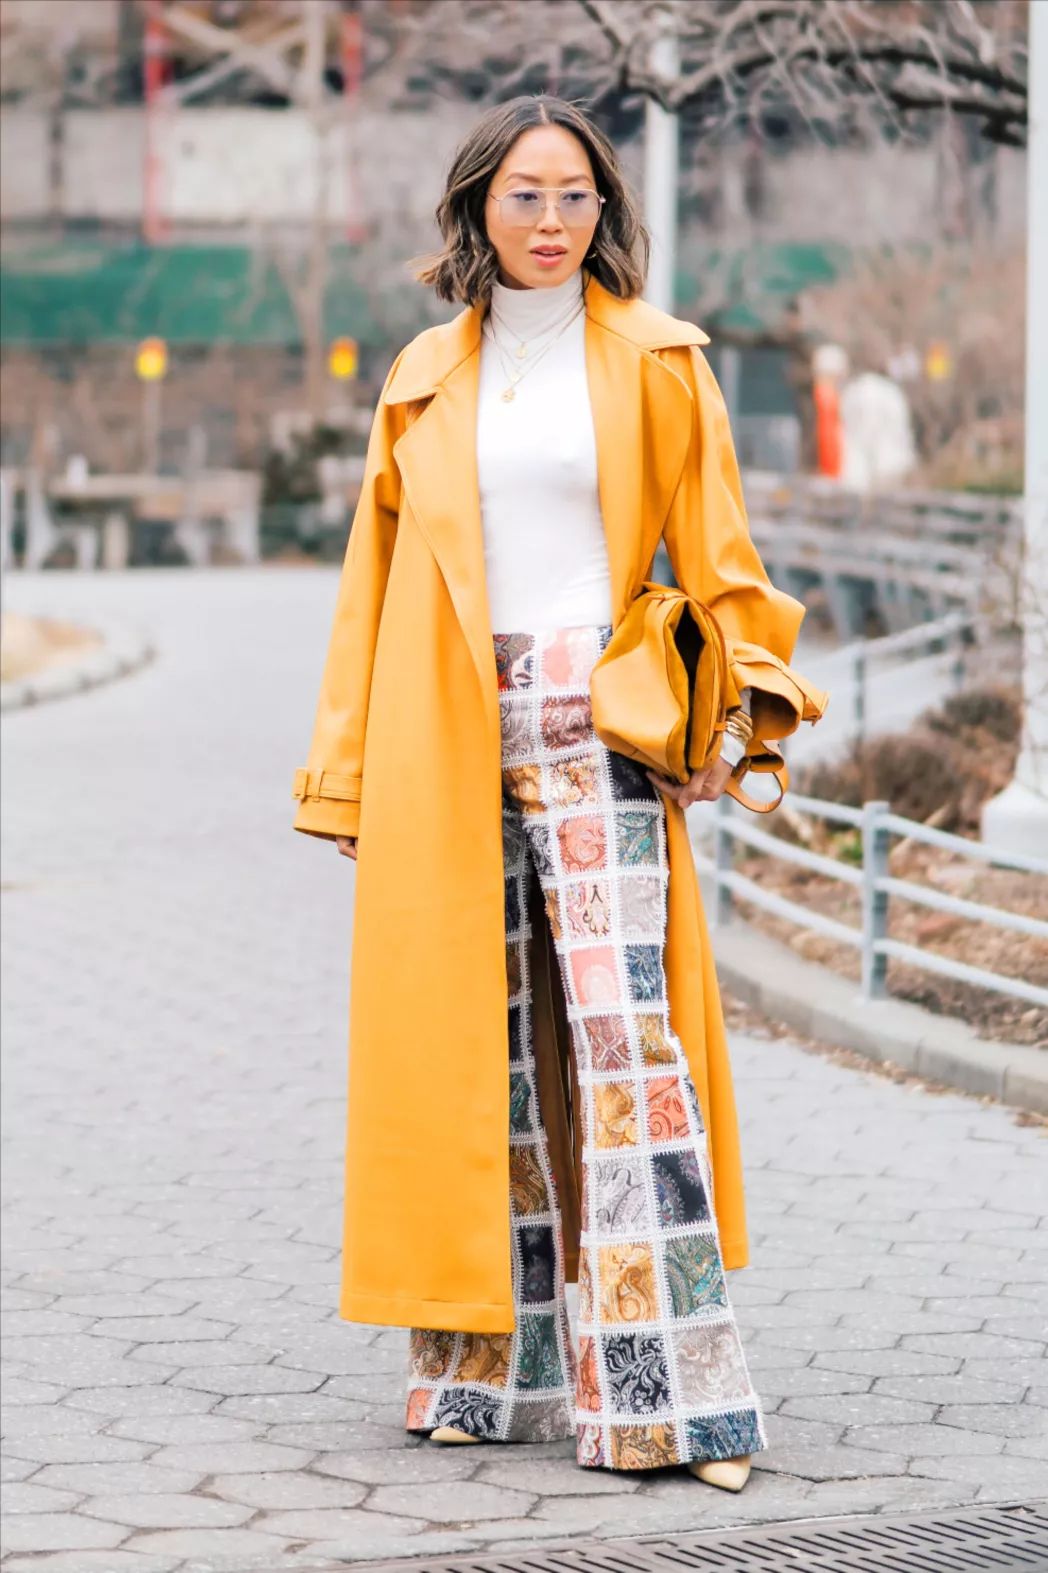 Still Wearing A Camel Coat? It's Time To Change Your Classy Coat In Spring 2020!